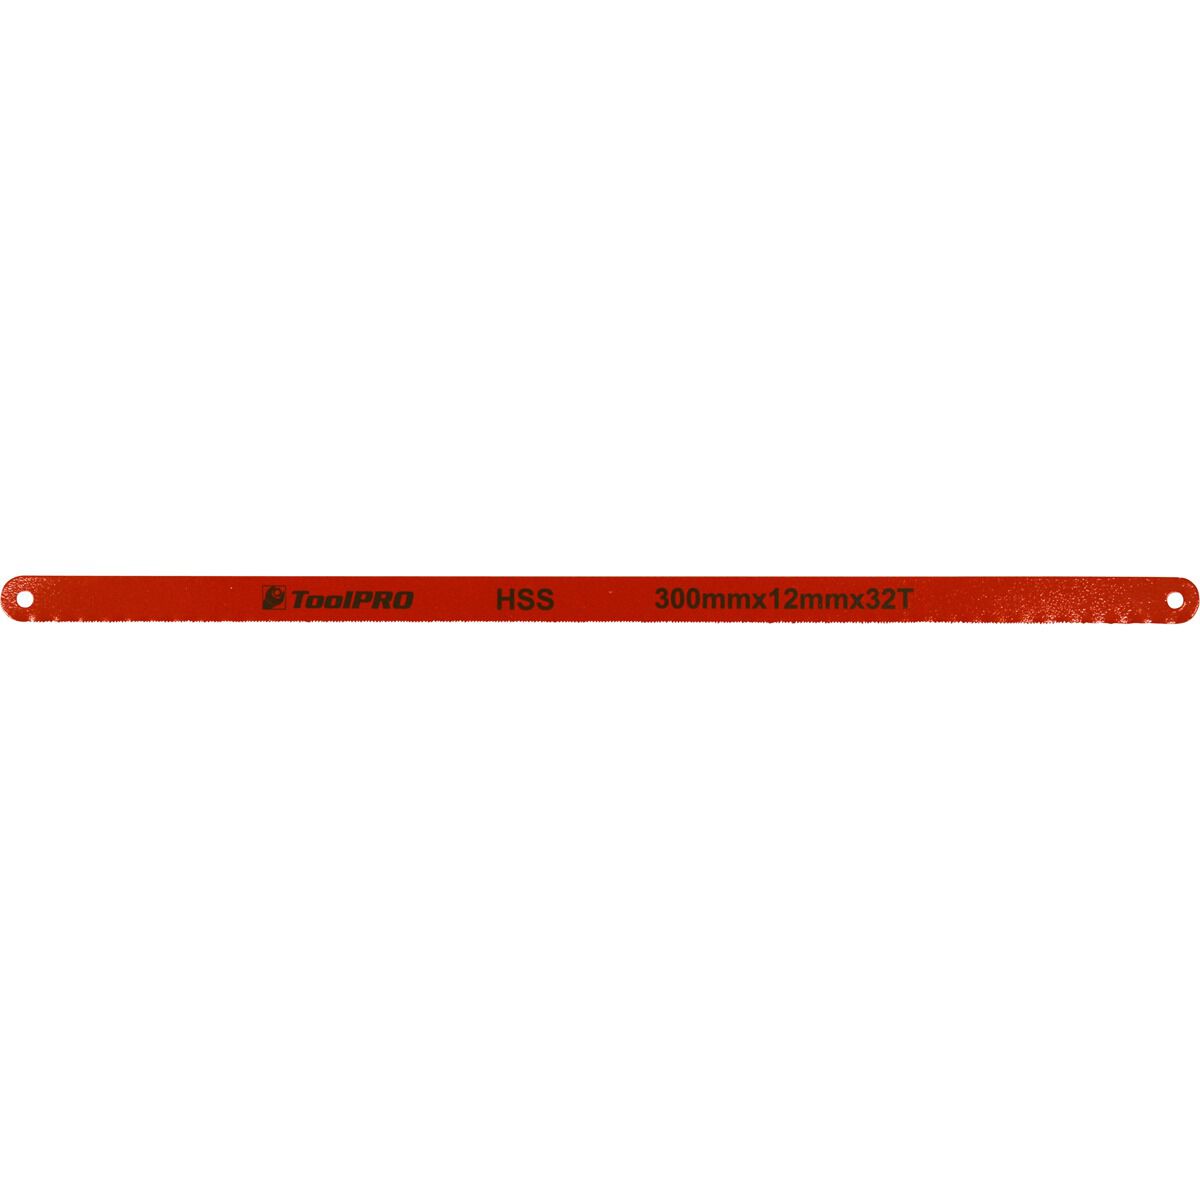 ToolPRO Hacksaw Blade - 300 x 12mm x 32T, Red, , scaau_hi-res